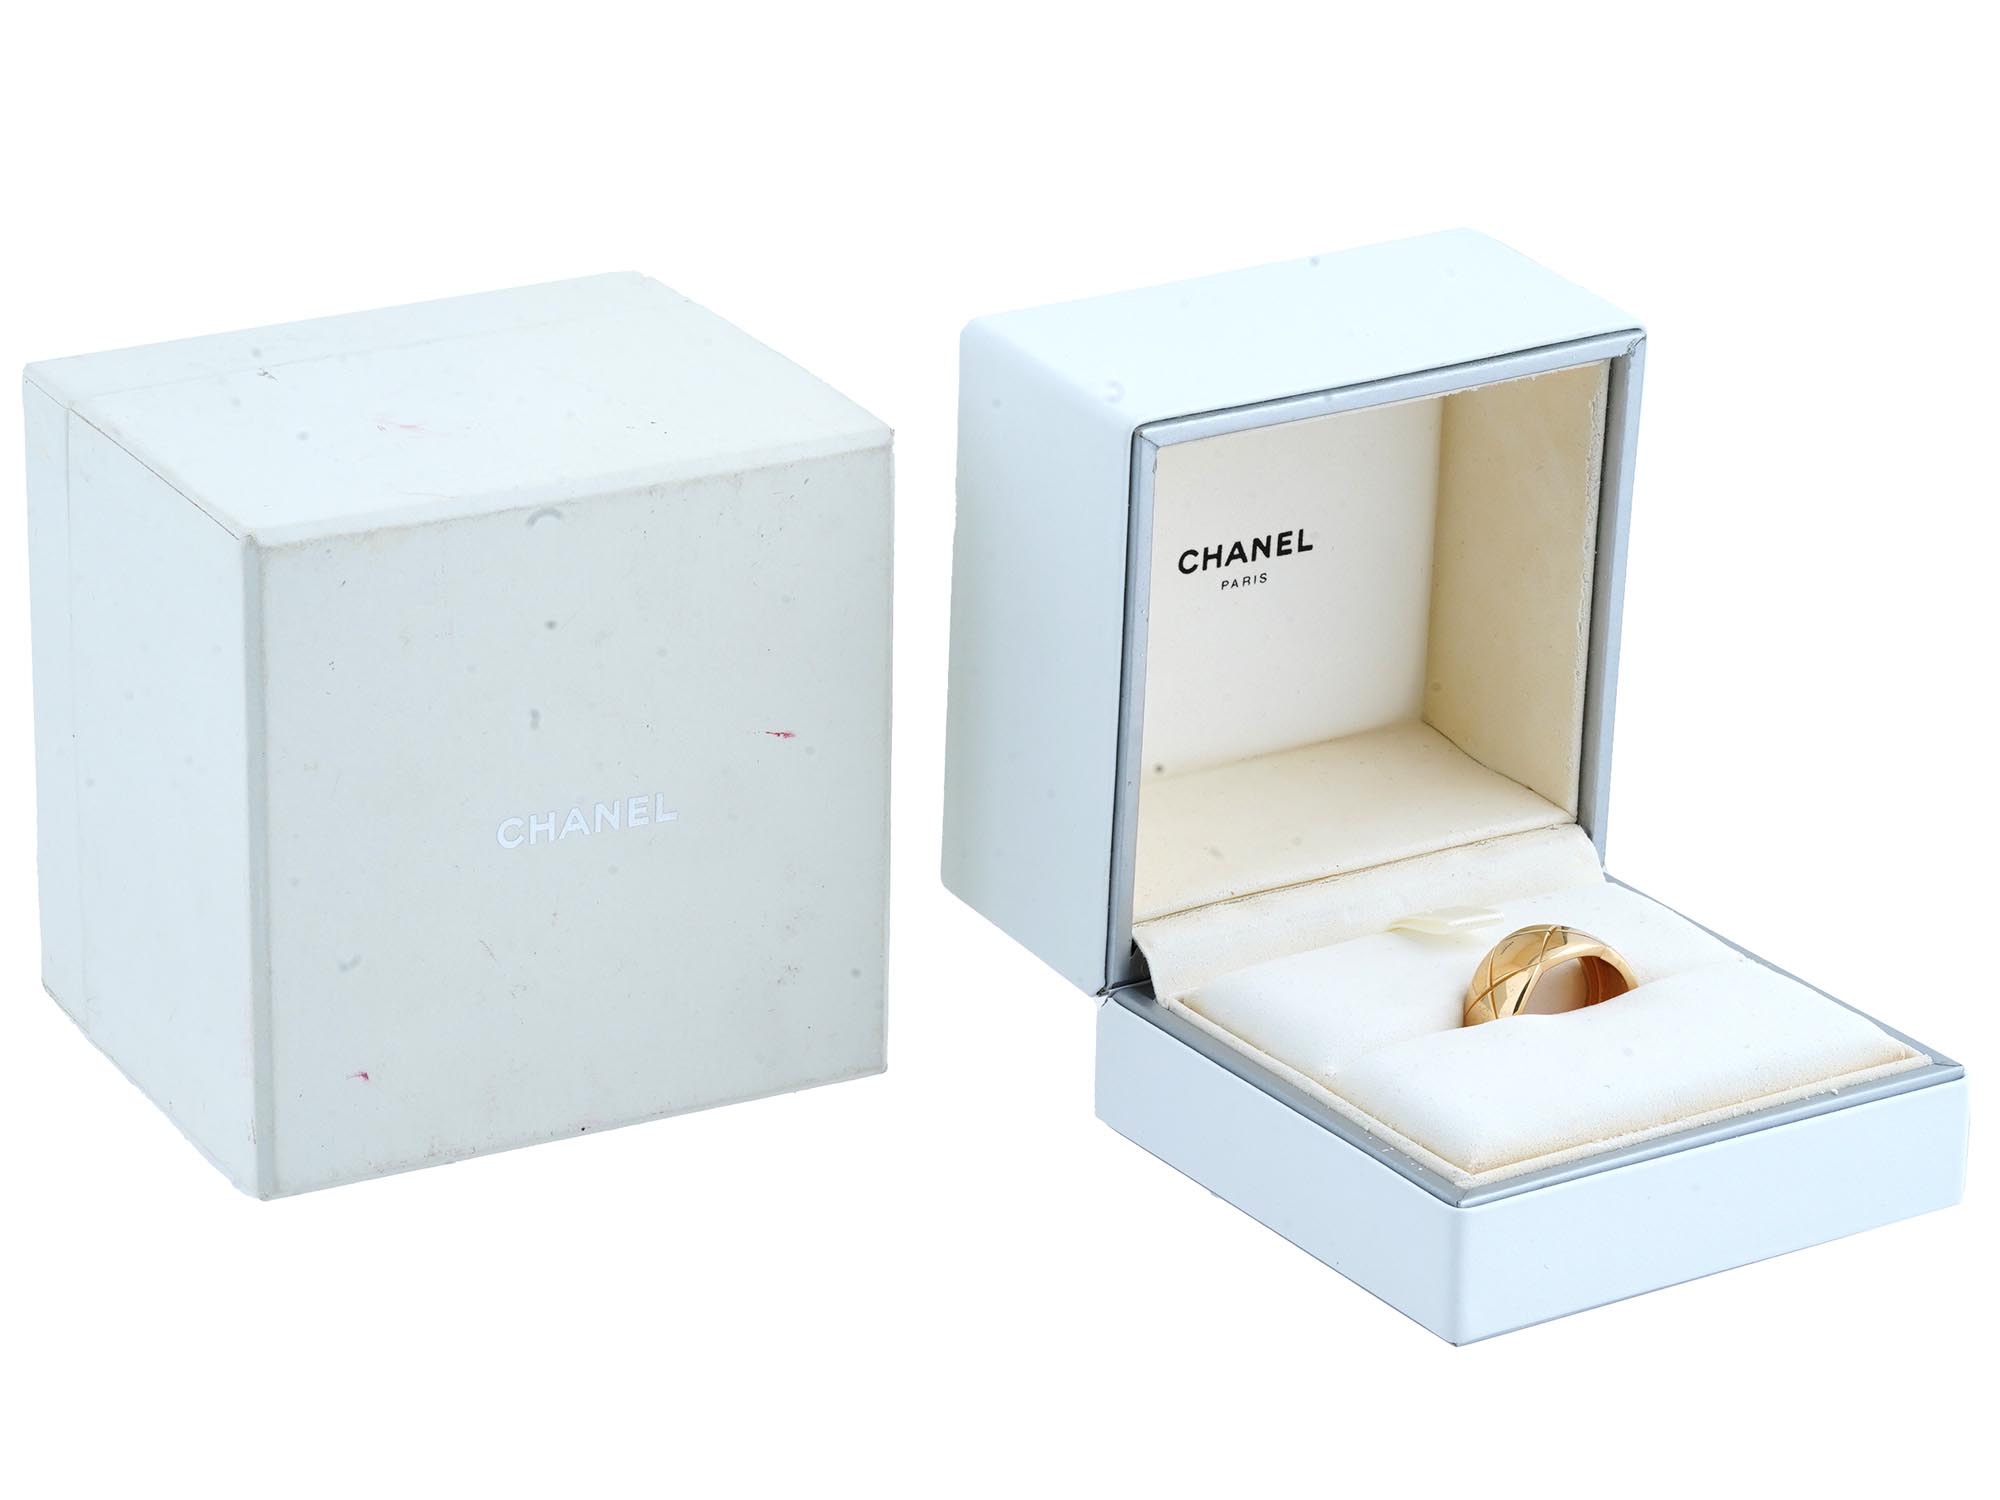 CHANEL 18K GOLD COCO CRUSH BAND RING IN A BOX PIC-0